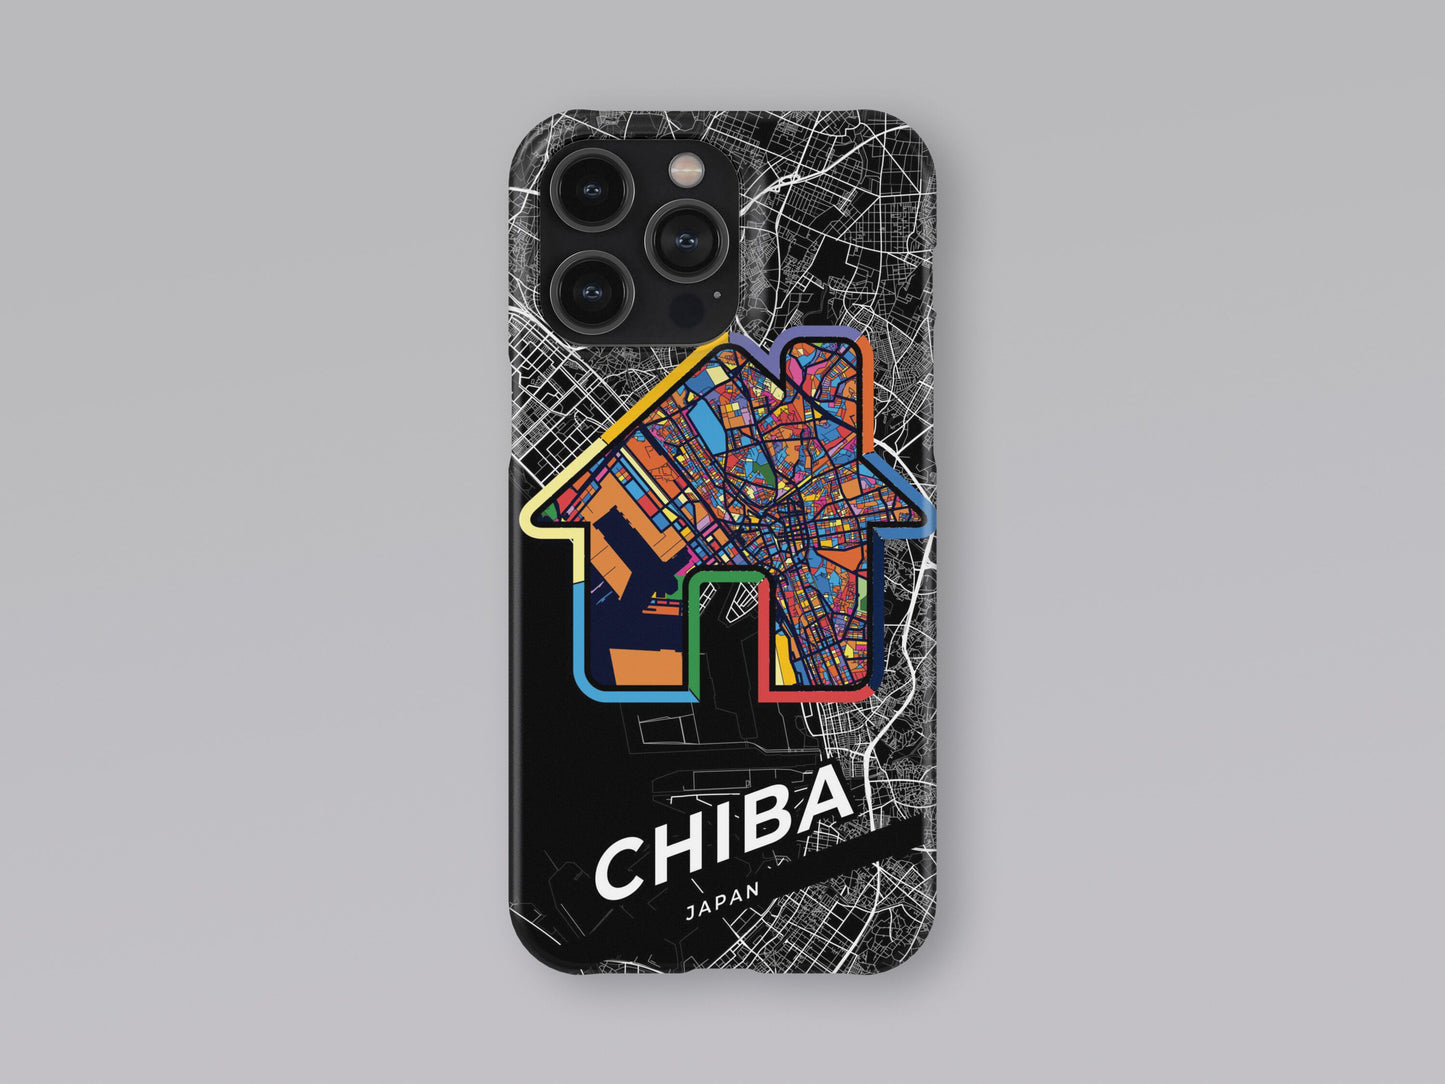 Chiba Japan slim phone case with colorful icon. Birthday, wedding or housewarming gift. Couple match cases. 3